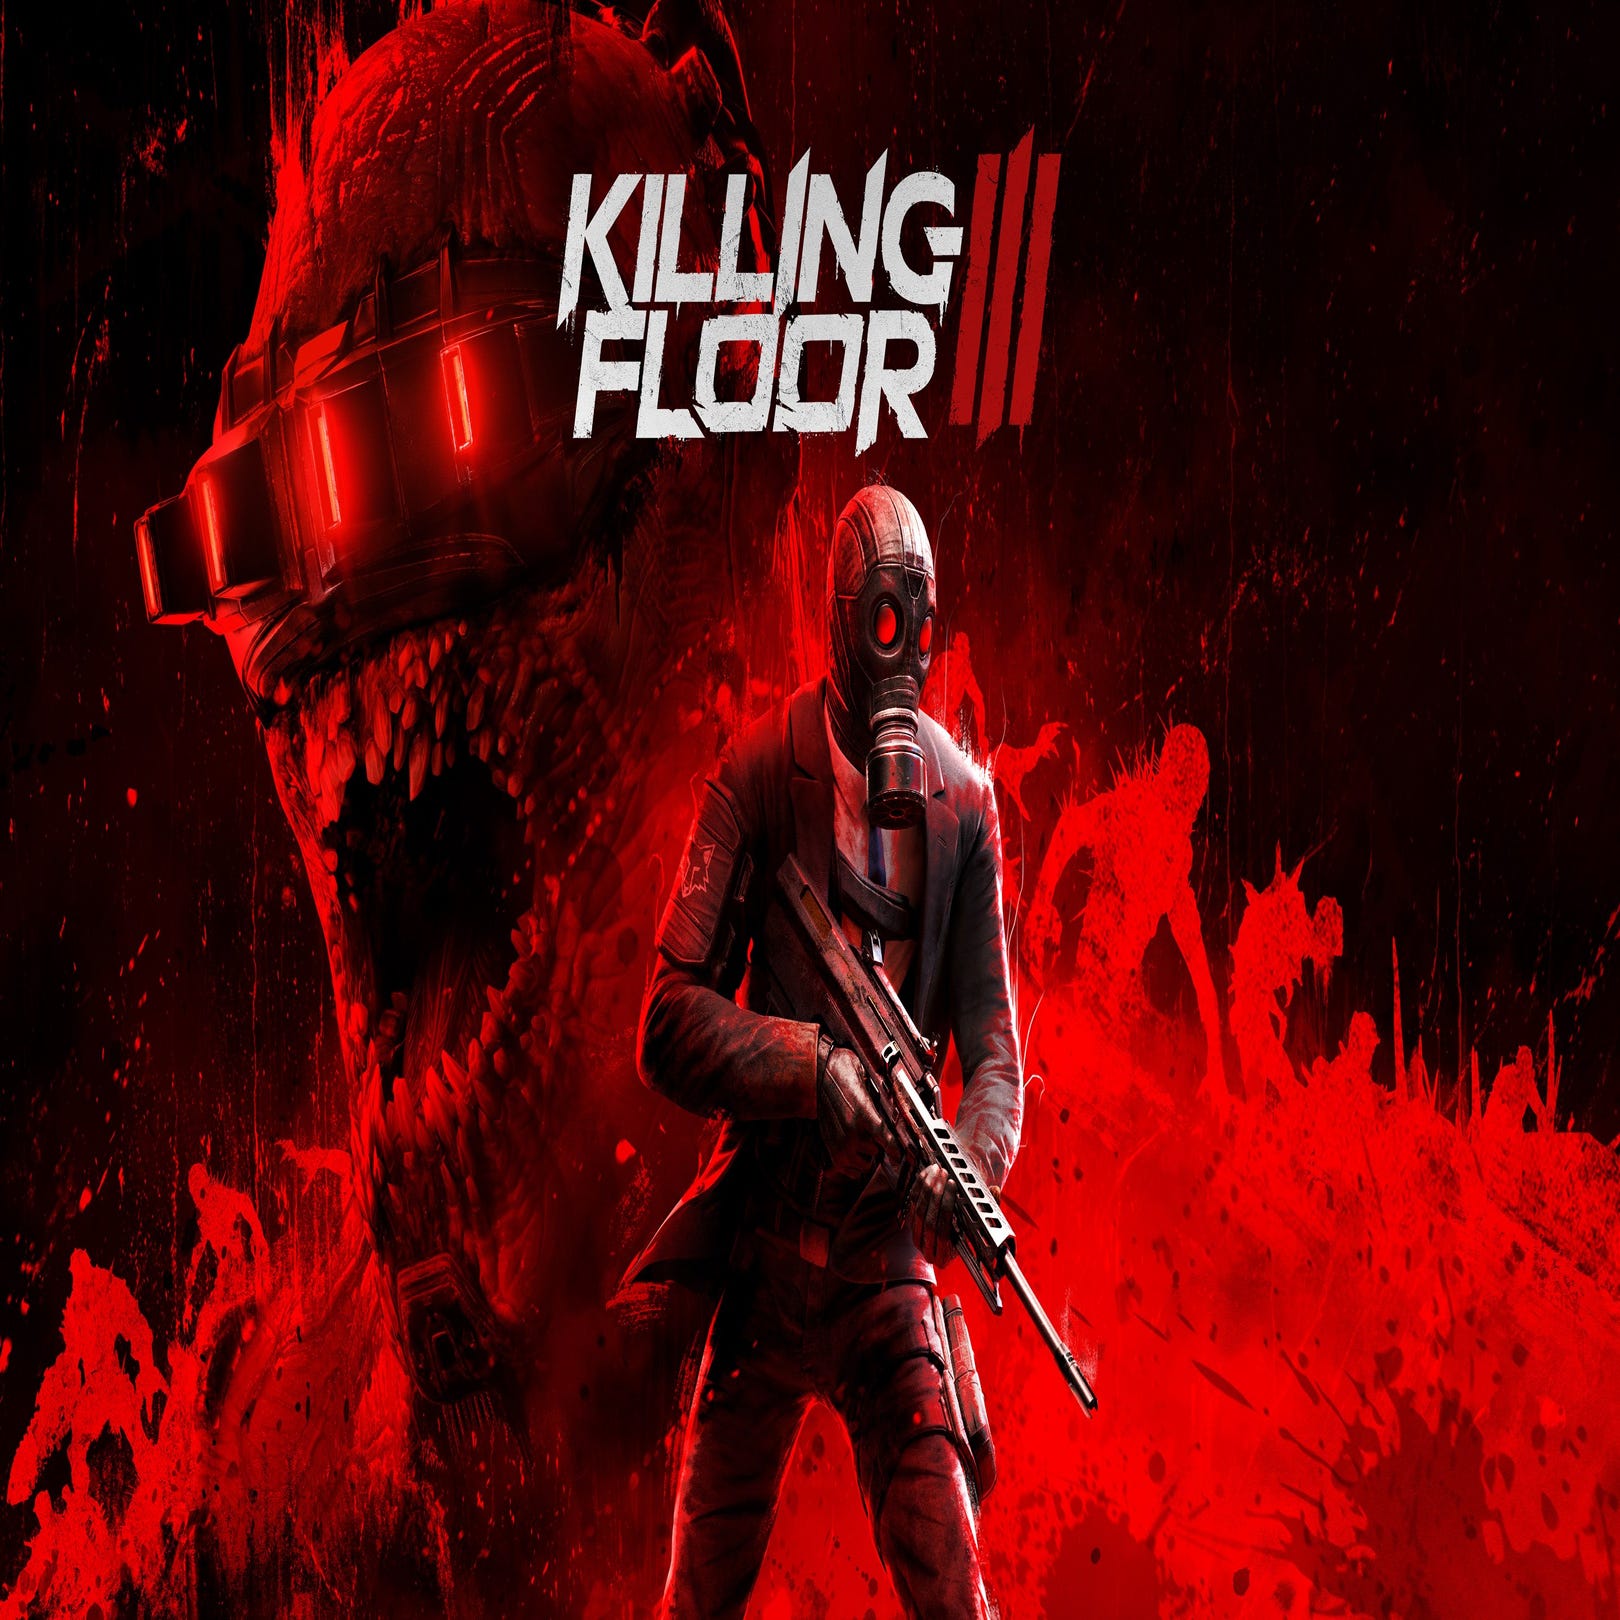 Killing Floor 3 delivers a first look at gameplay, but now we have to wait until 2025 to play it